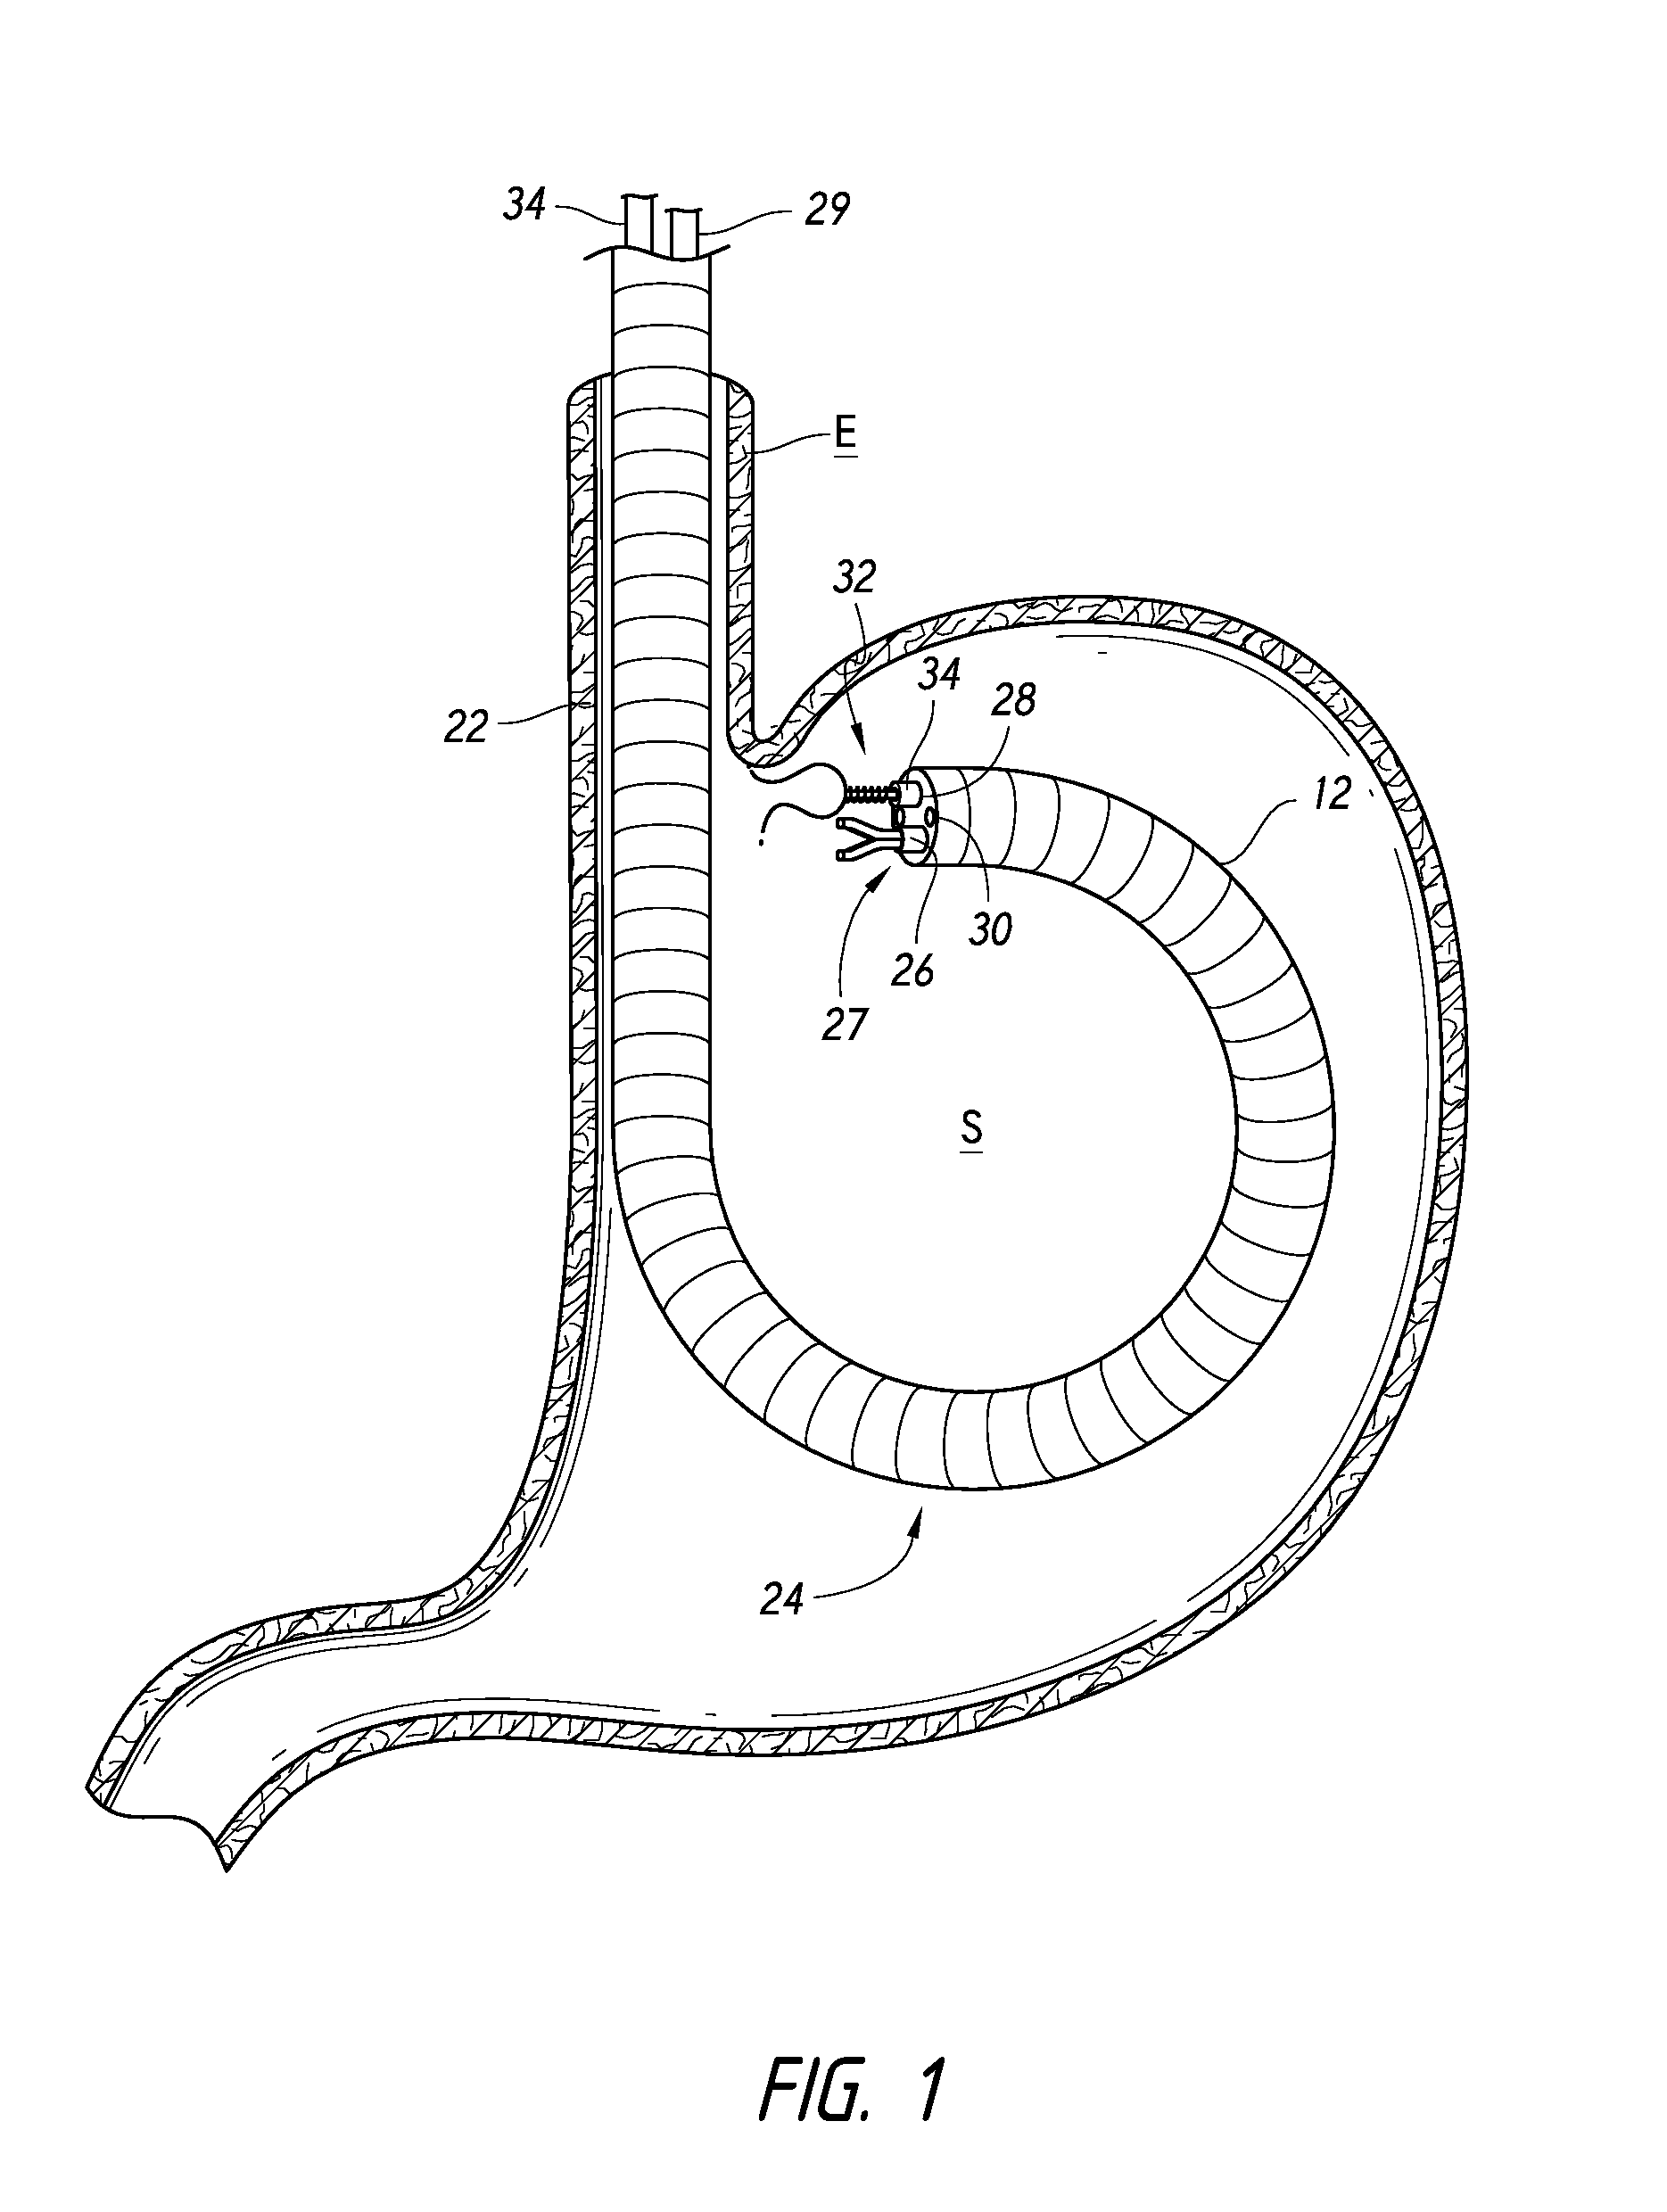 Devices and methods for the endolumenal treatment of obesity